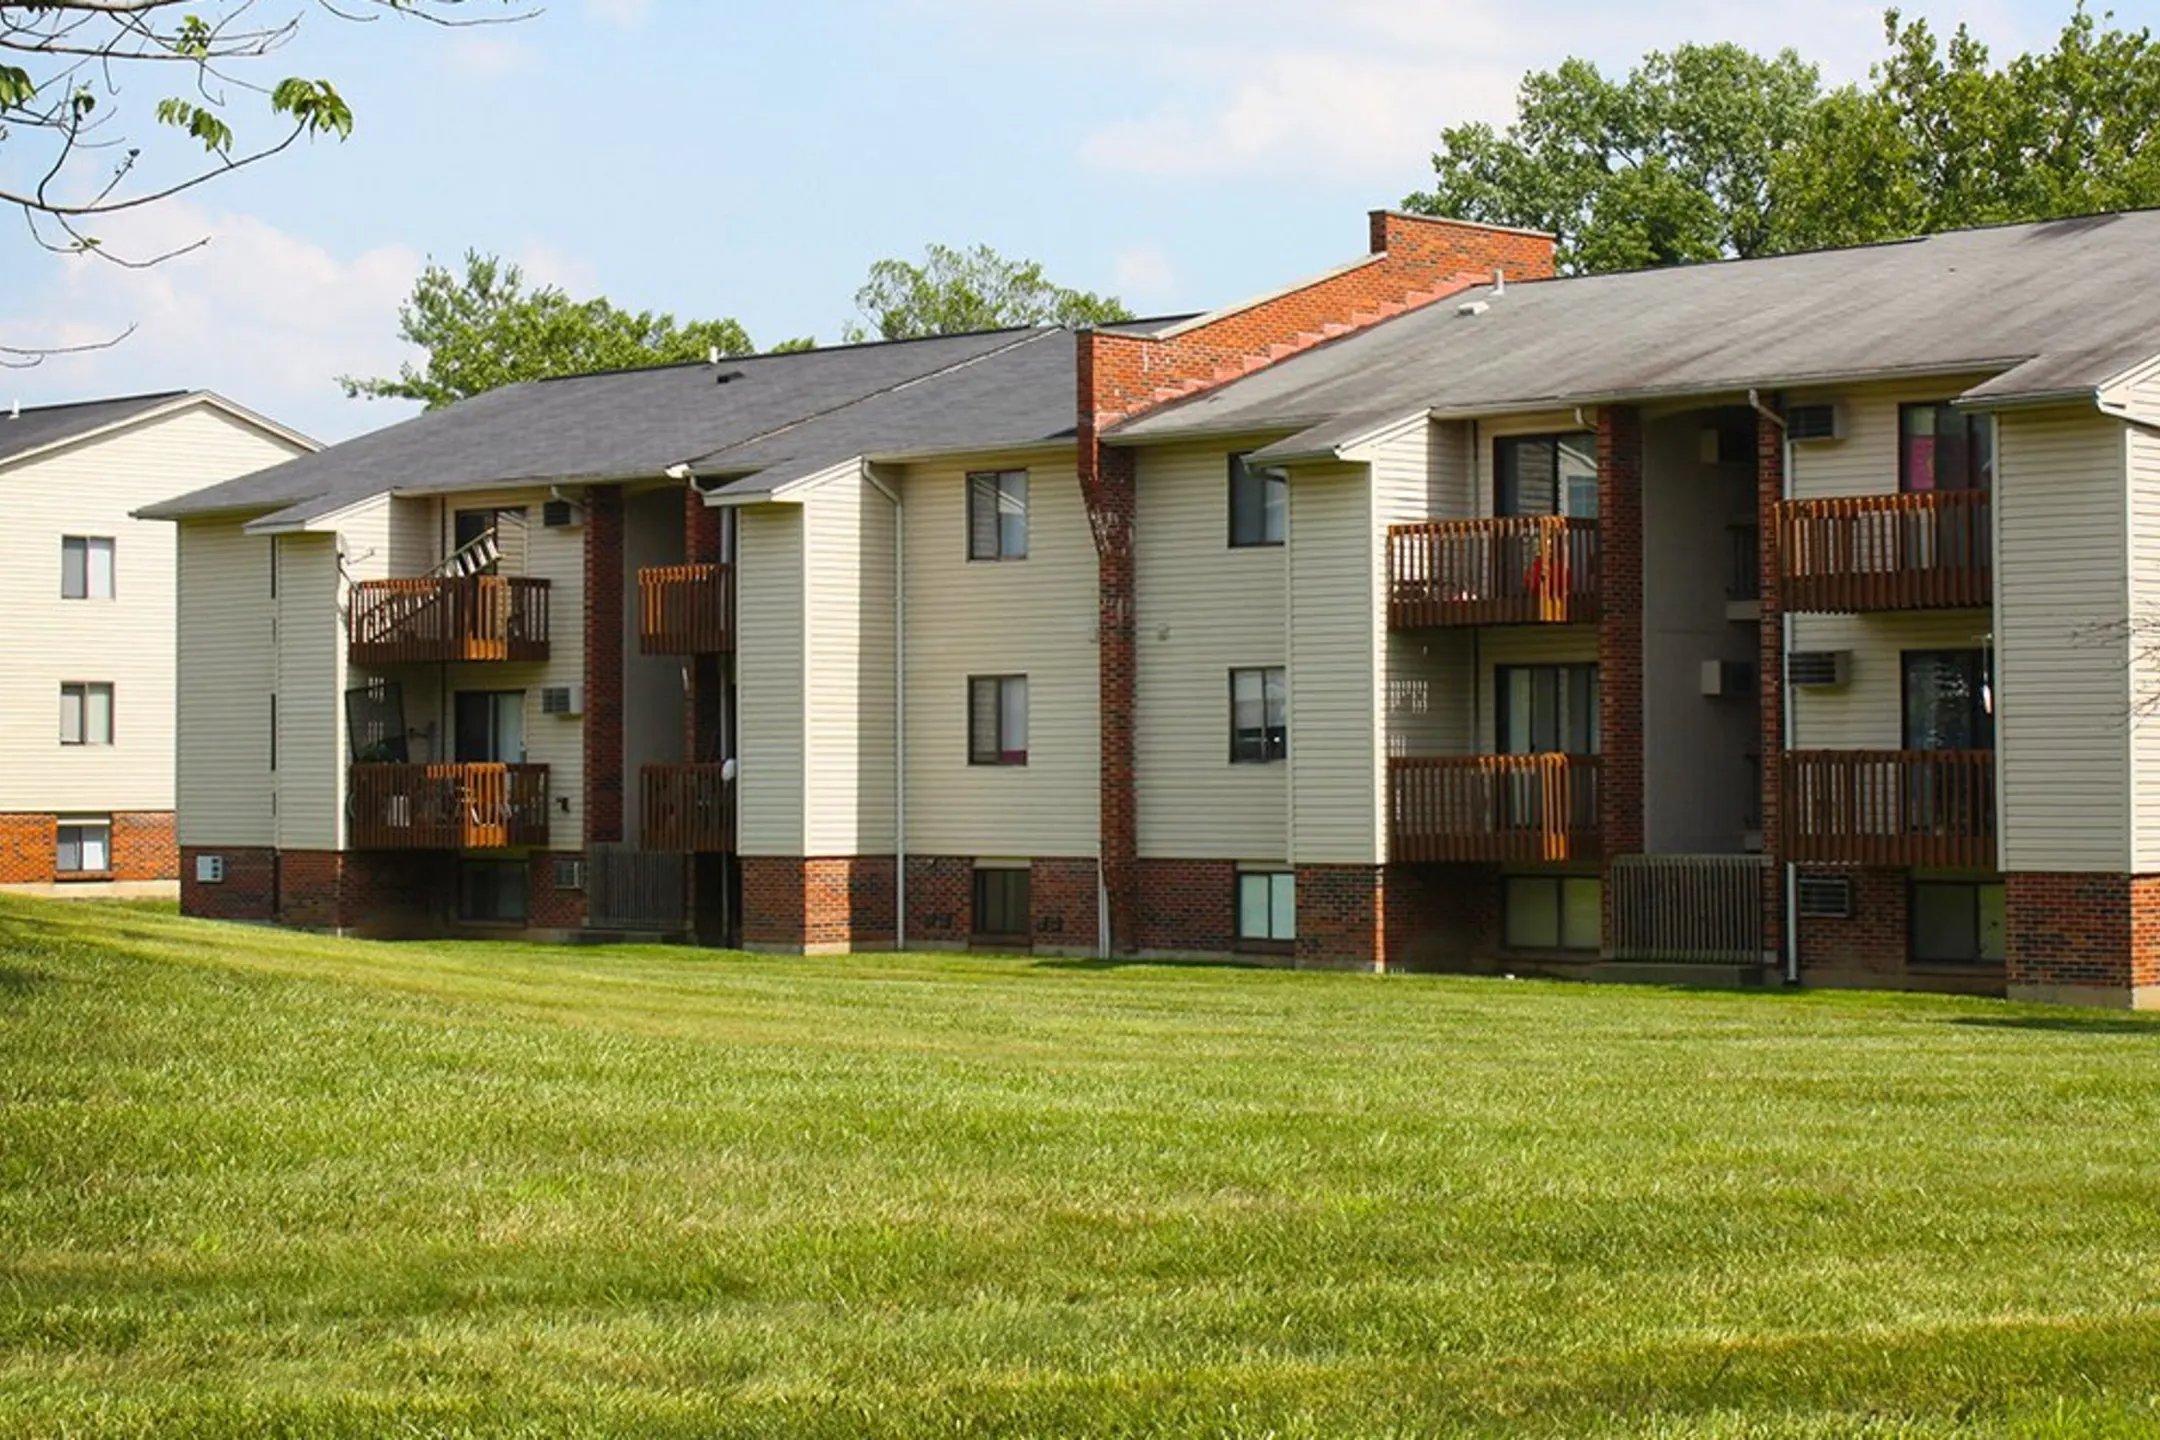 Building - Oakwood Apartments - Florence, KY